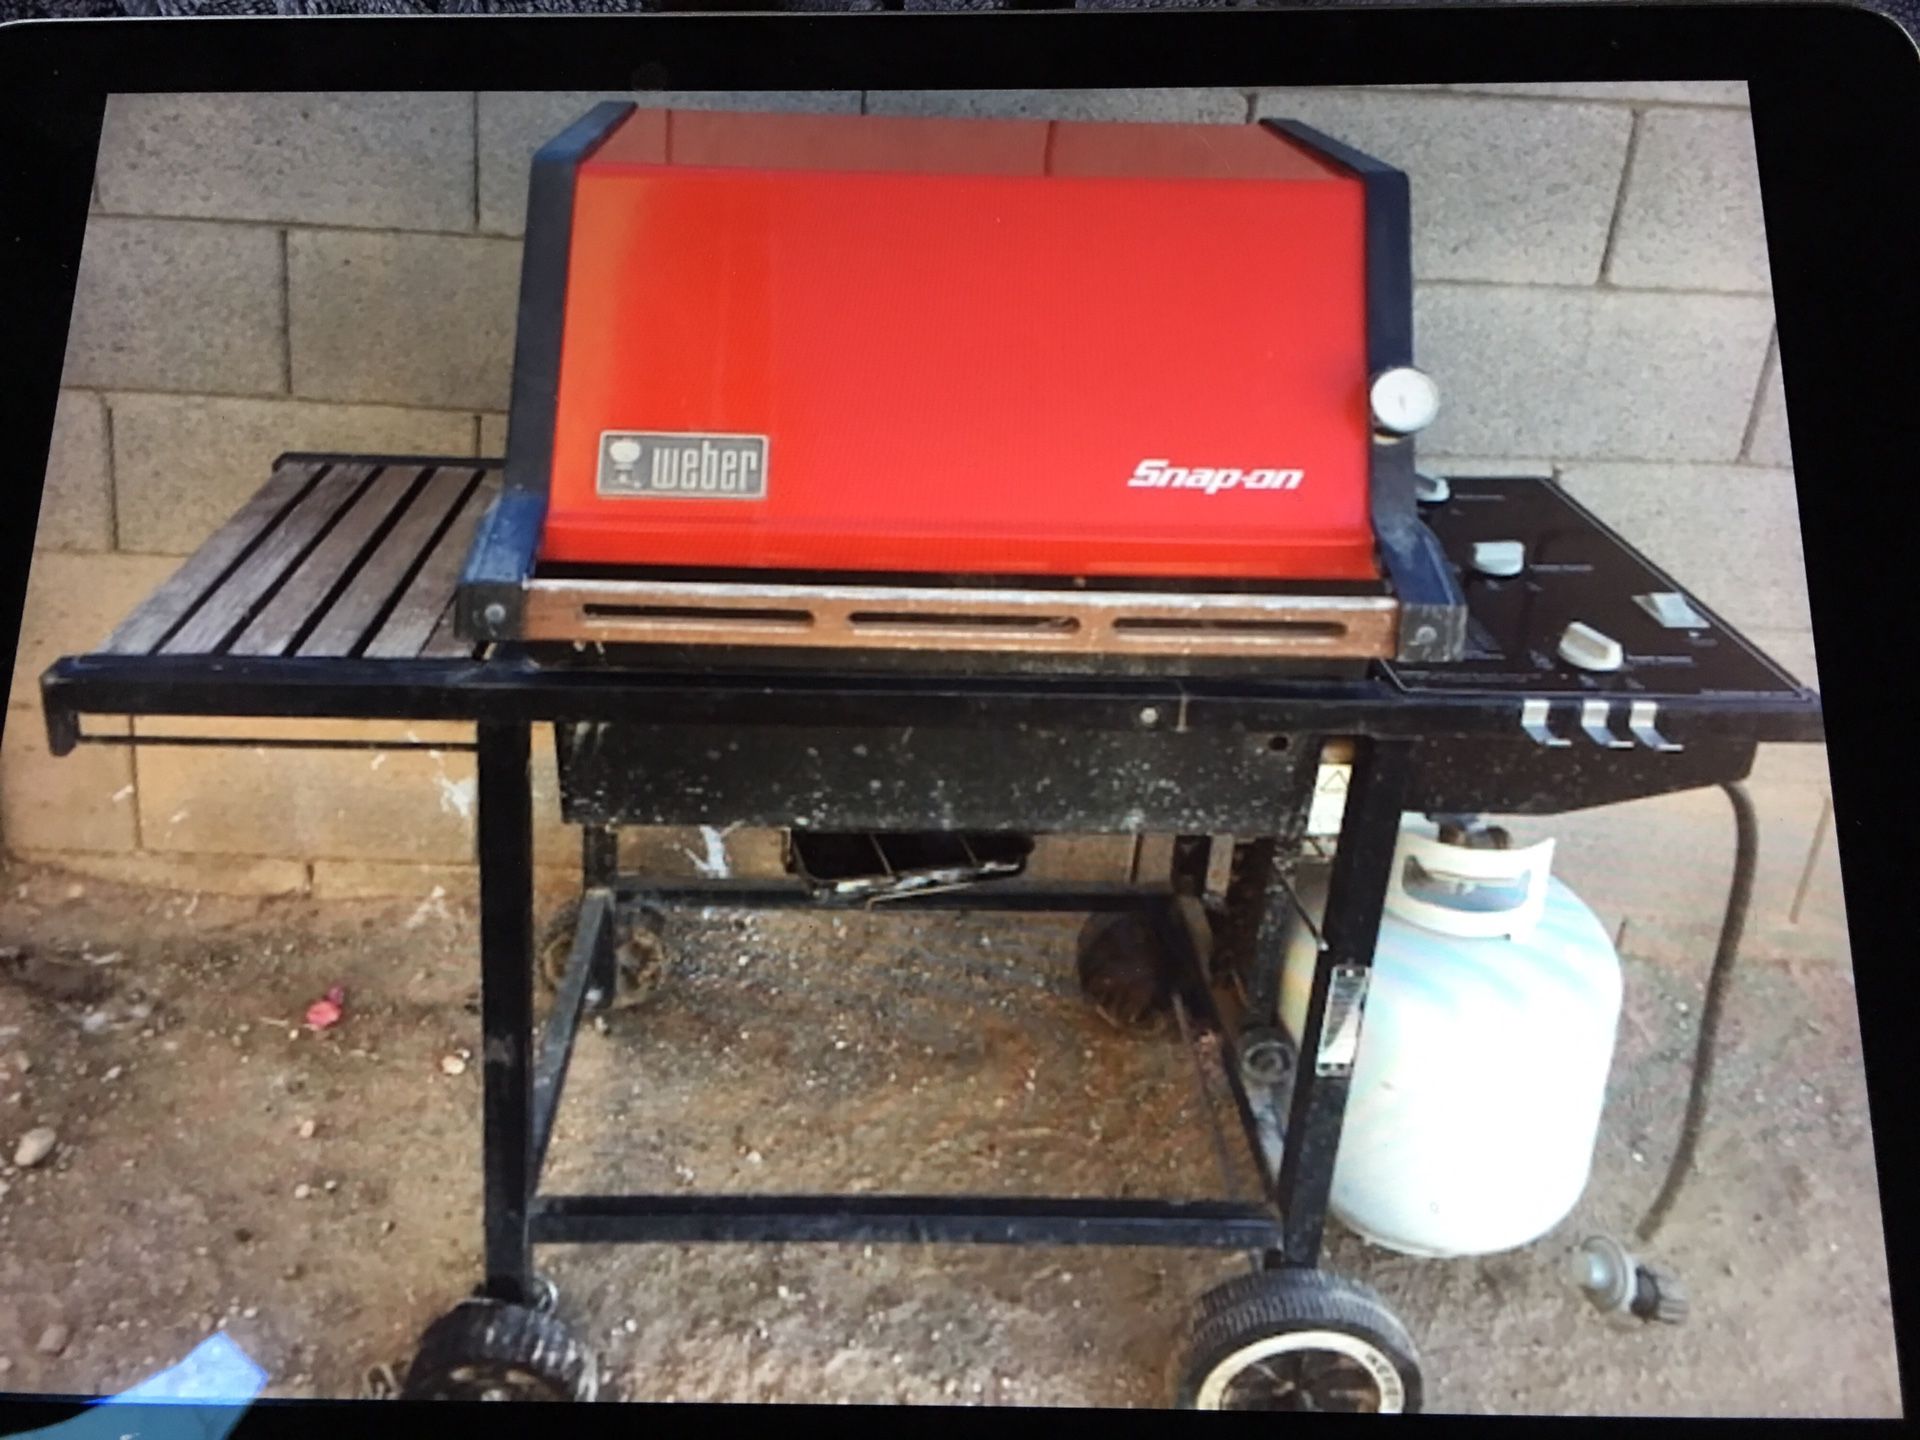 Snap-On Weber barbecue 34 years old and is still running/looking good! These cast aluminum relics don’t rust and are easily refurbished or maintained